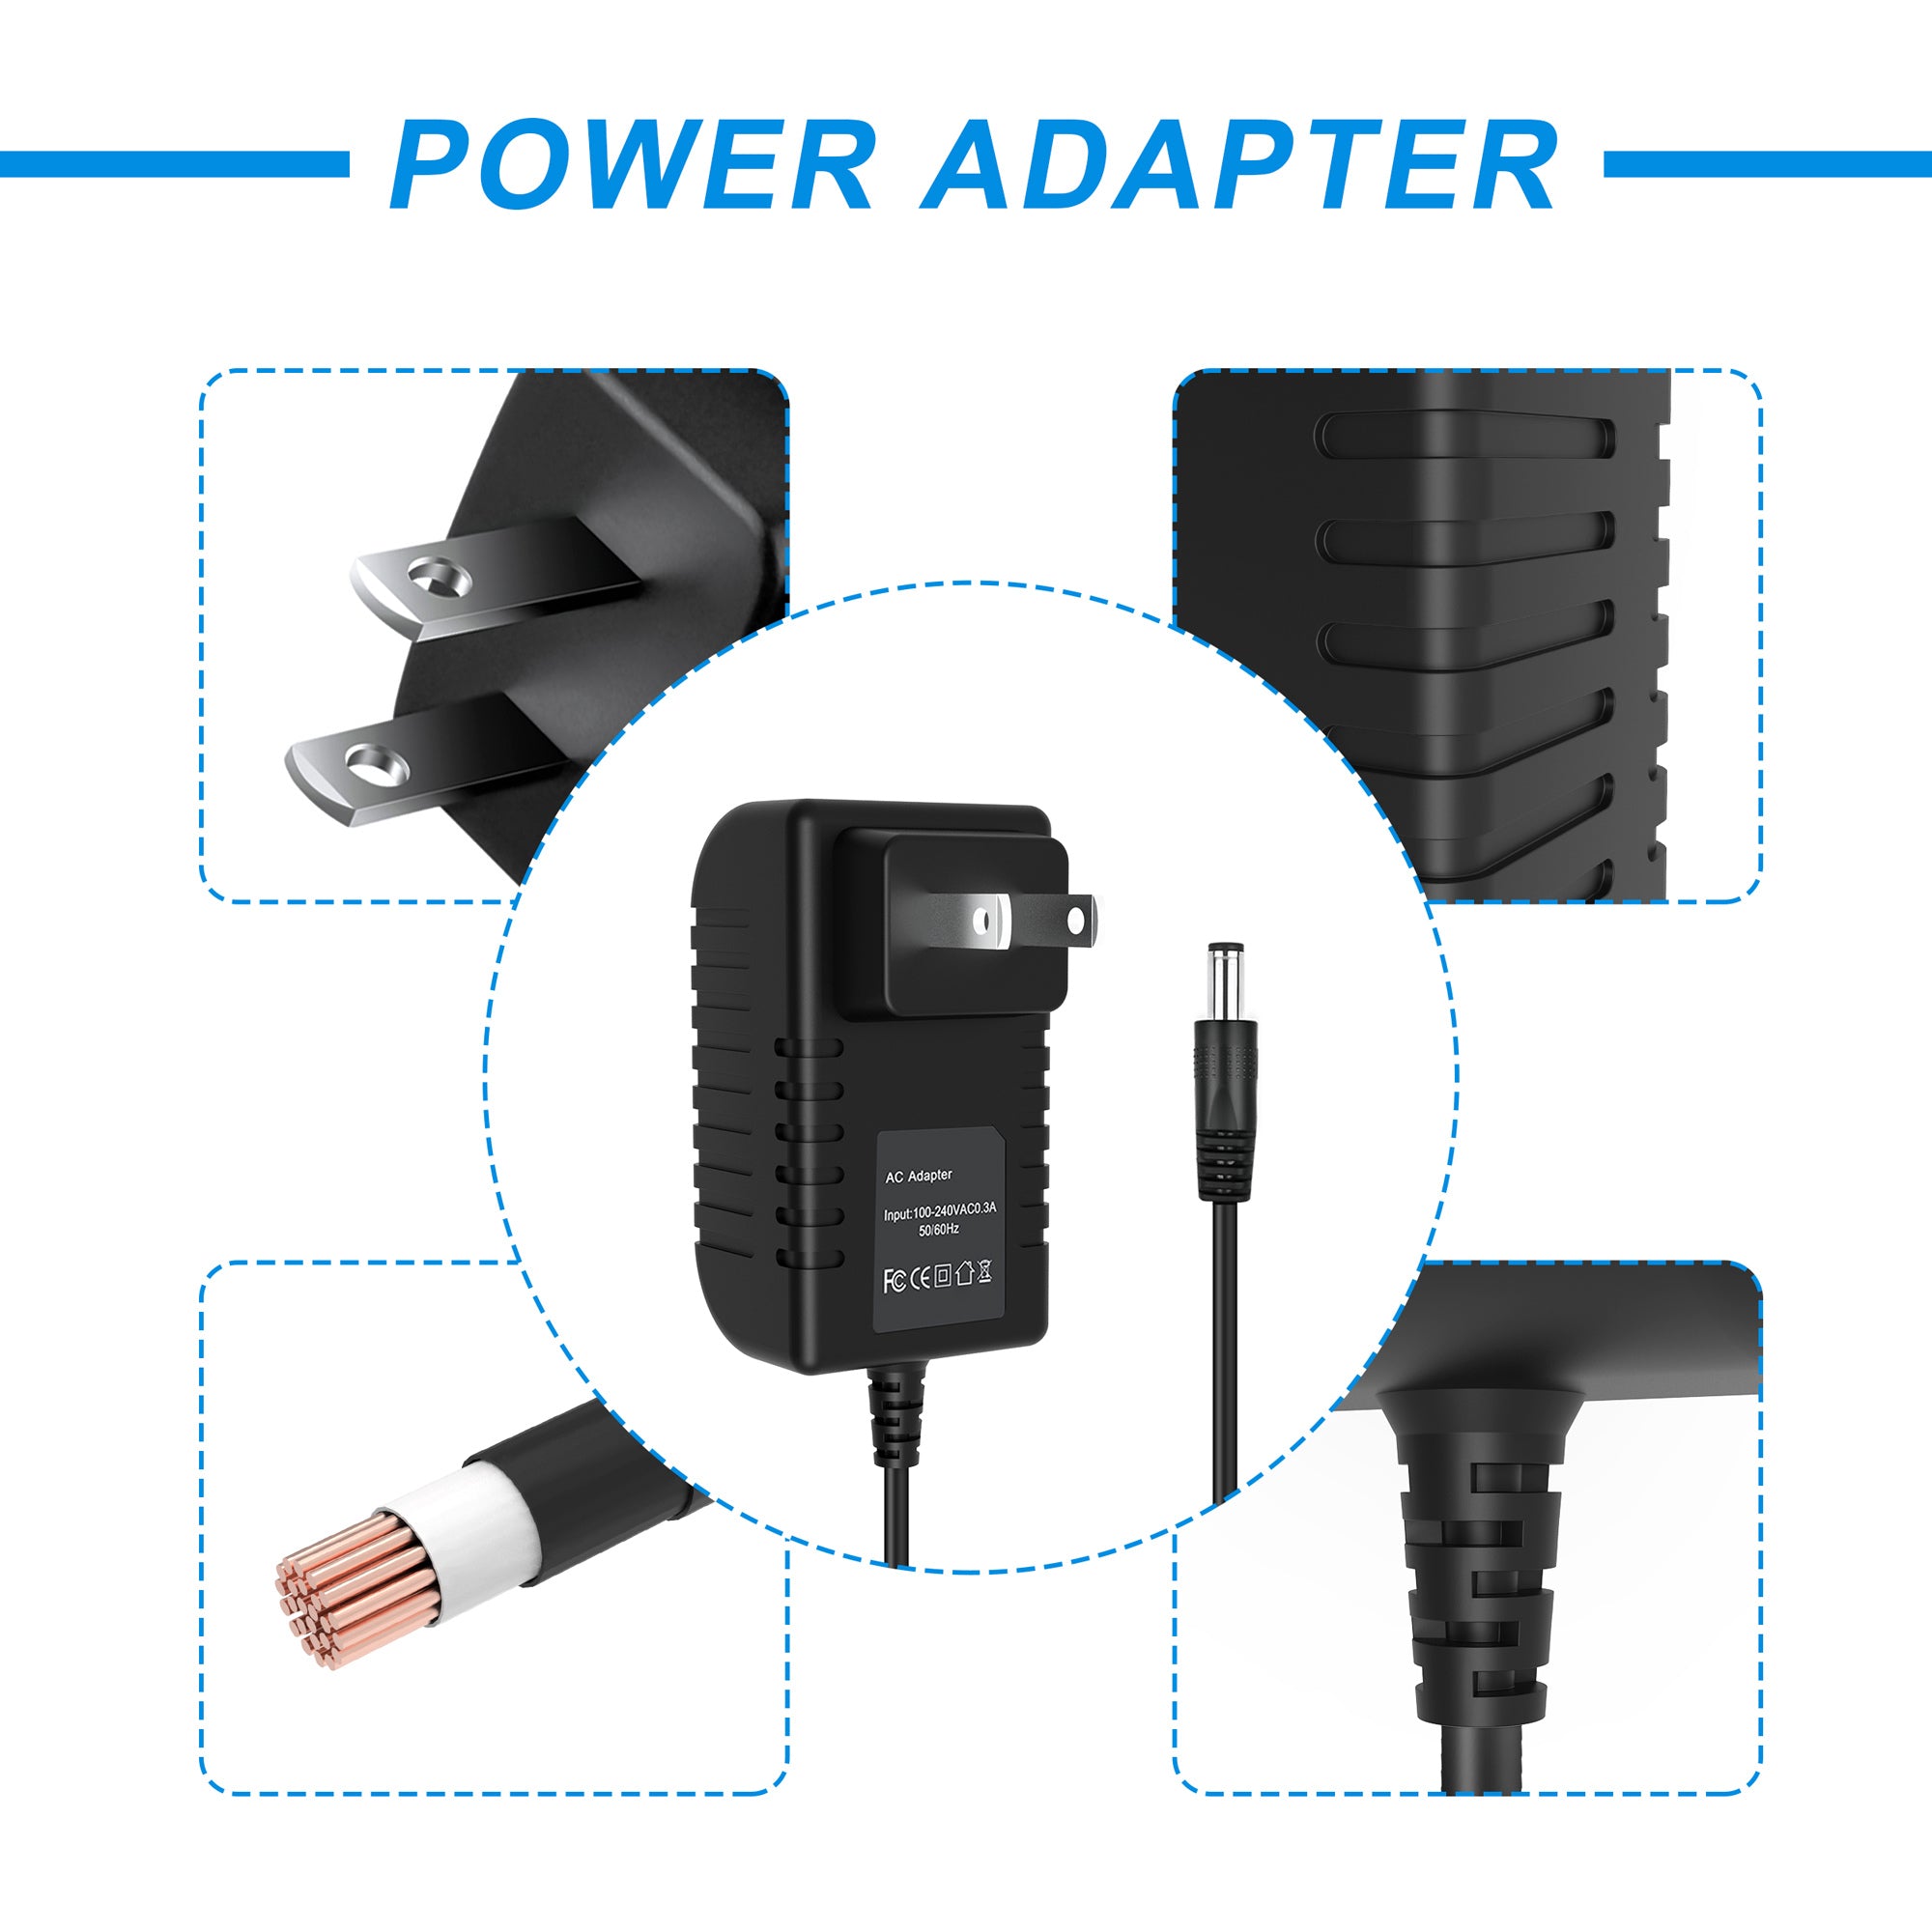 AbleGrid 12V AC Mains Adaptor Power Supply Charger Compatible with Pyramat S2500 Gaming Chair Mains